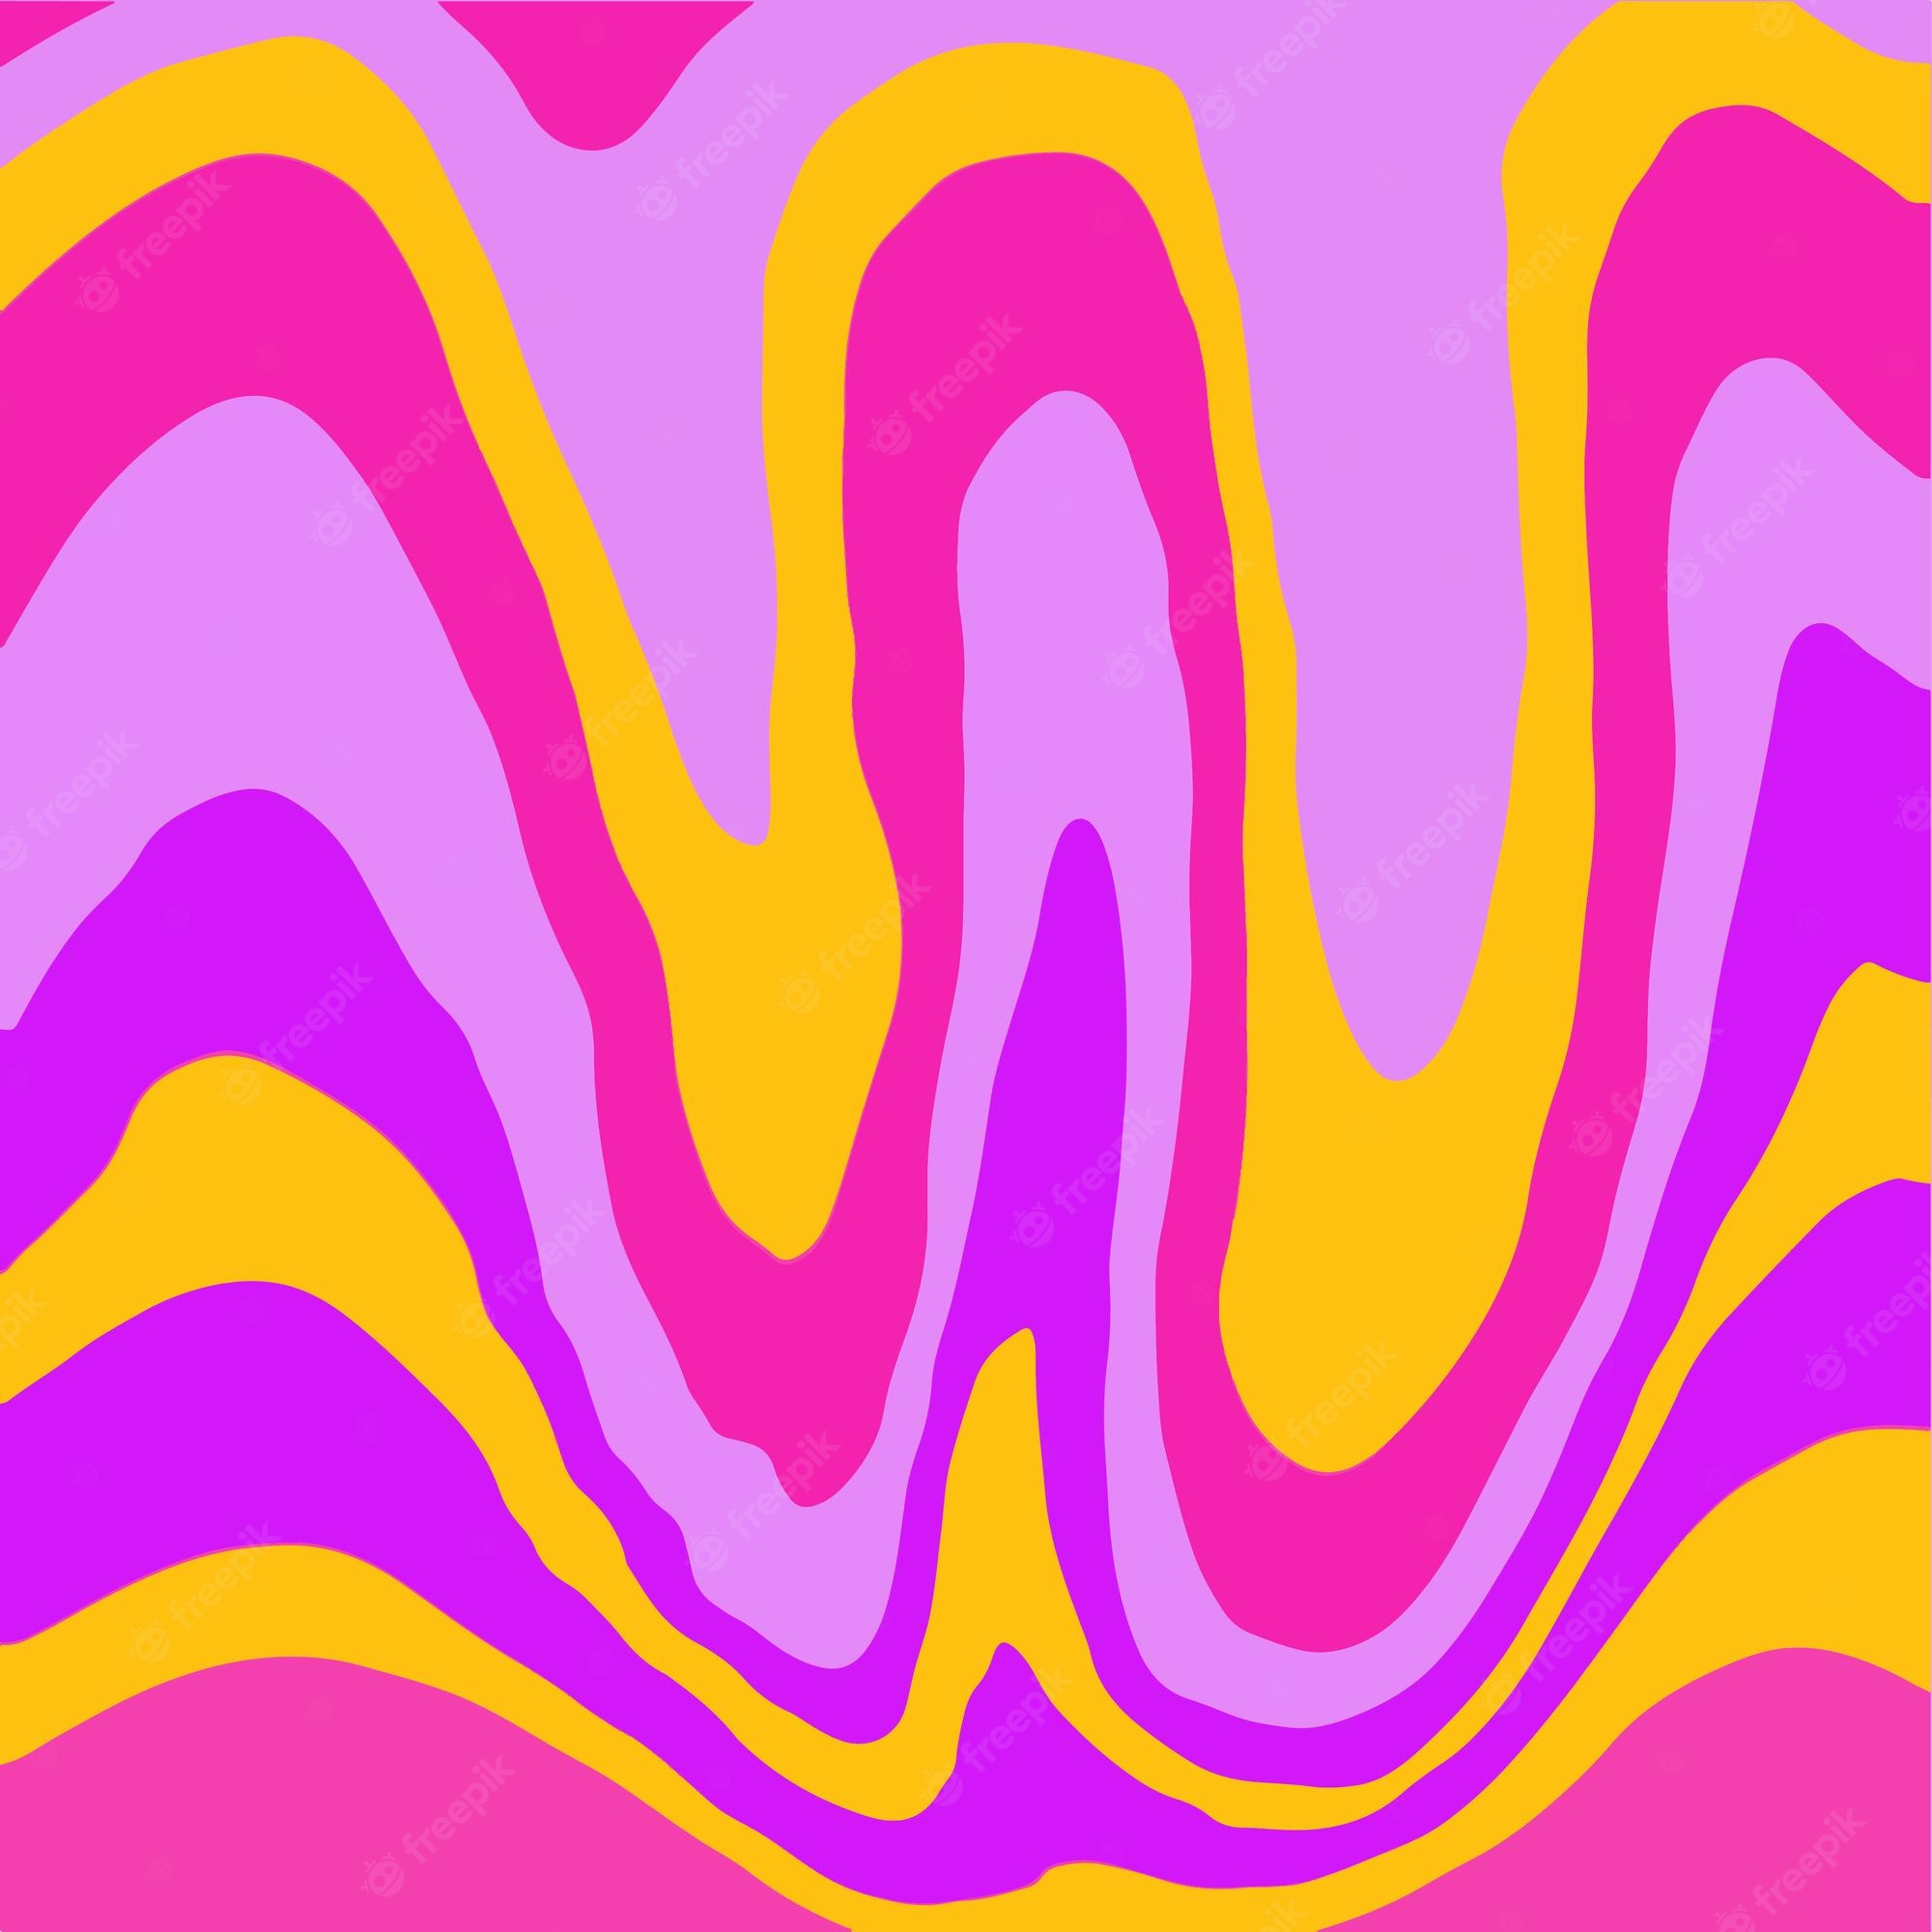 Wave Y2k Background For Retro Design Liquid Groovy Marble Pink Background Purple  Y2k Pattern In Modern Style Pink Psychedelic Retro Wave Wallpaper Stock  Illustration  Download Image Now  iStock